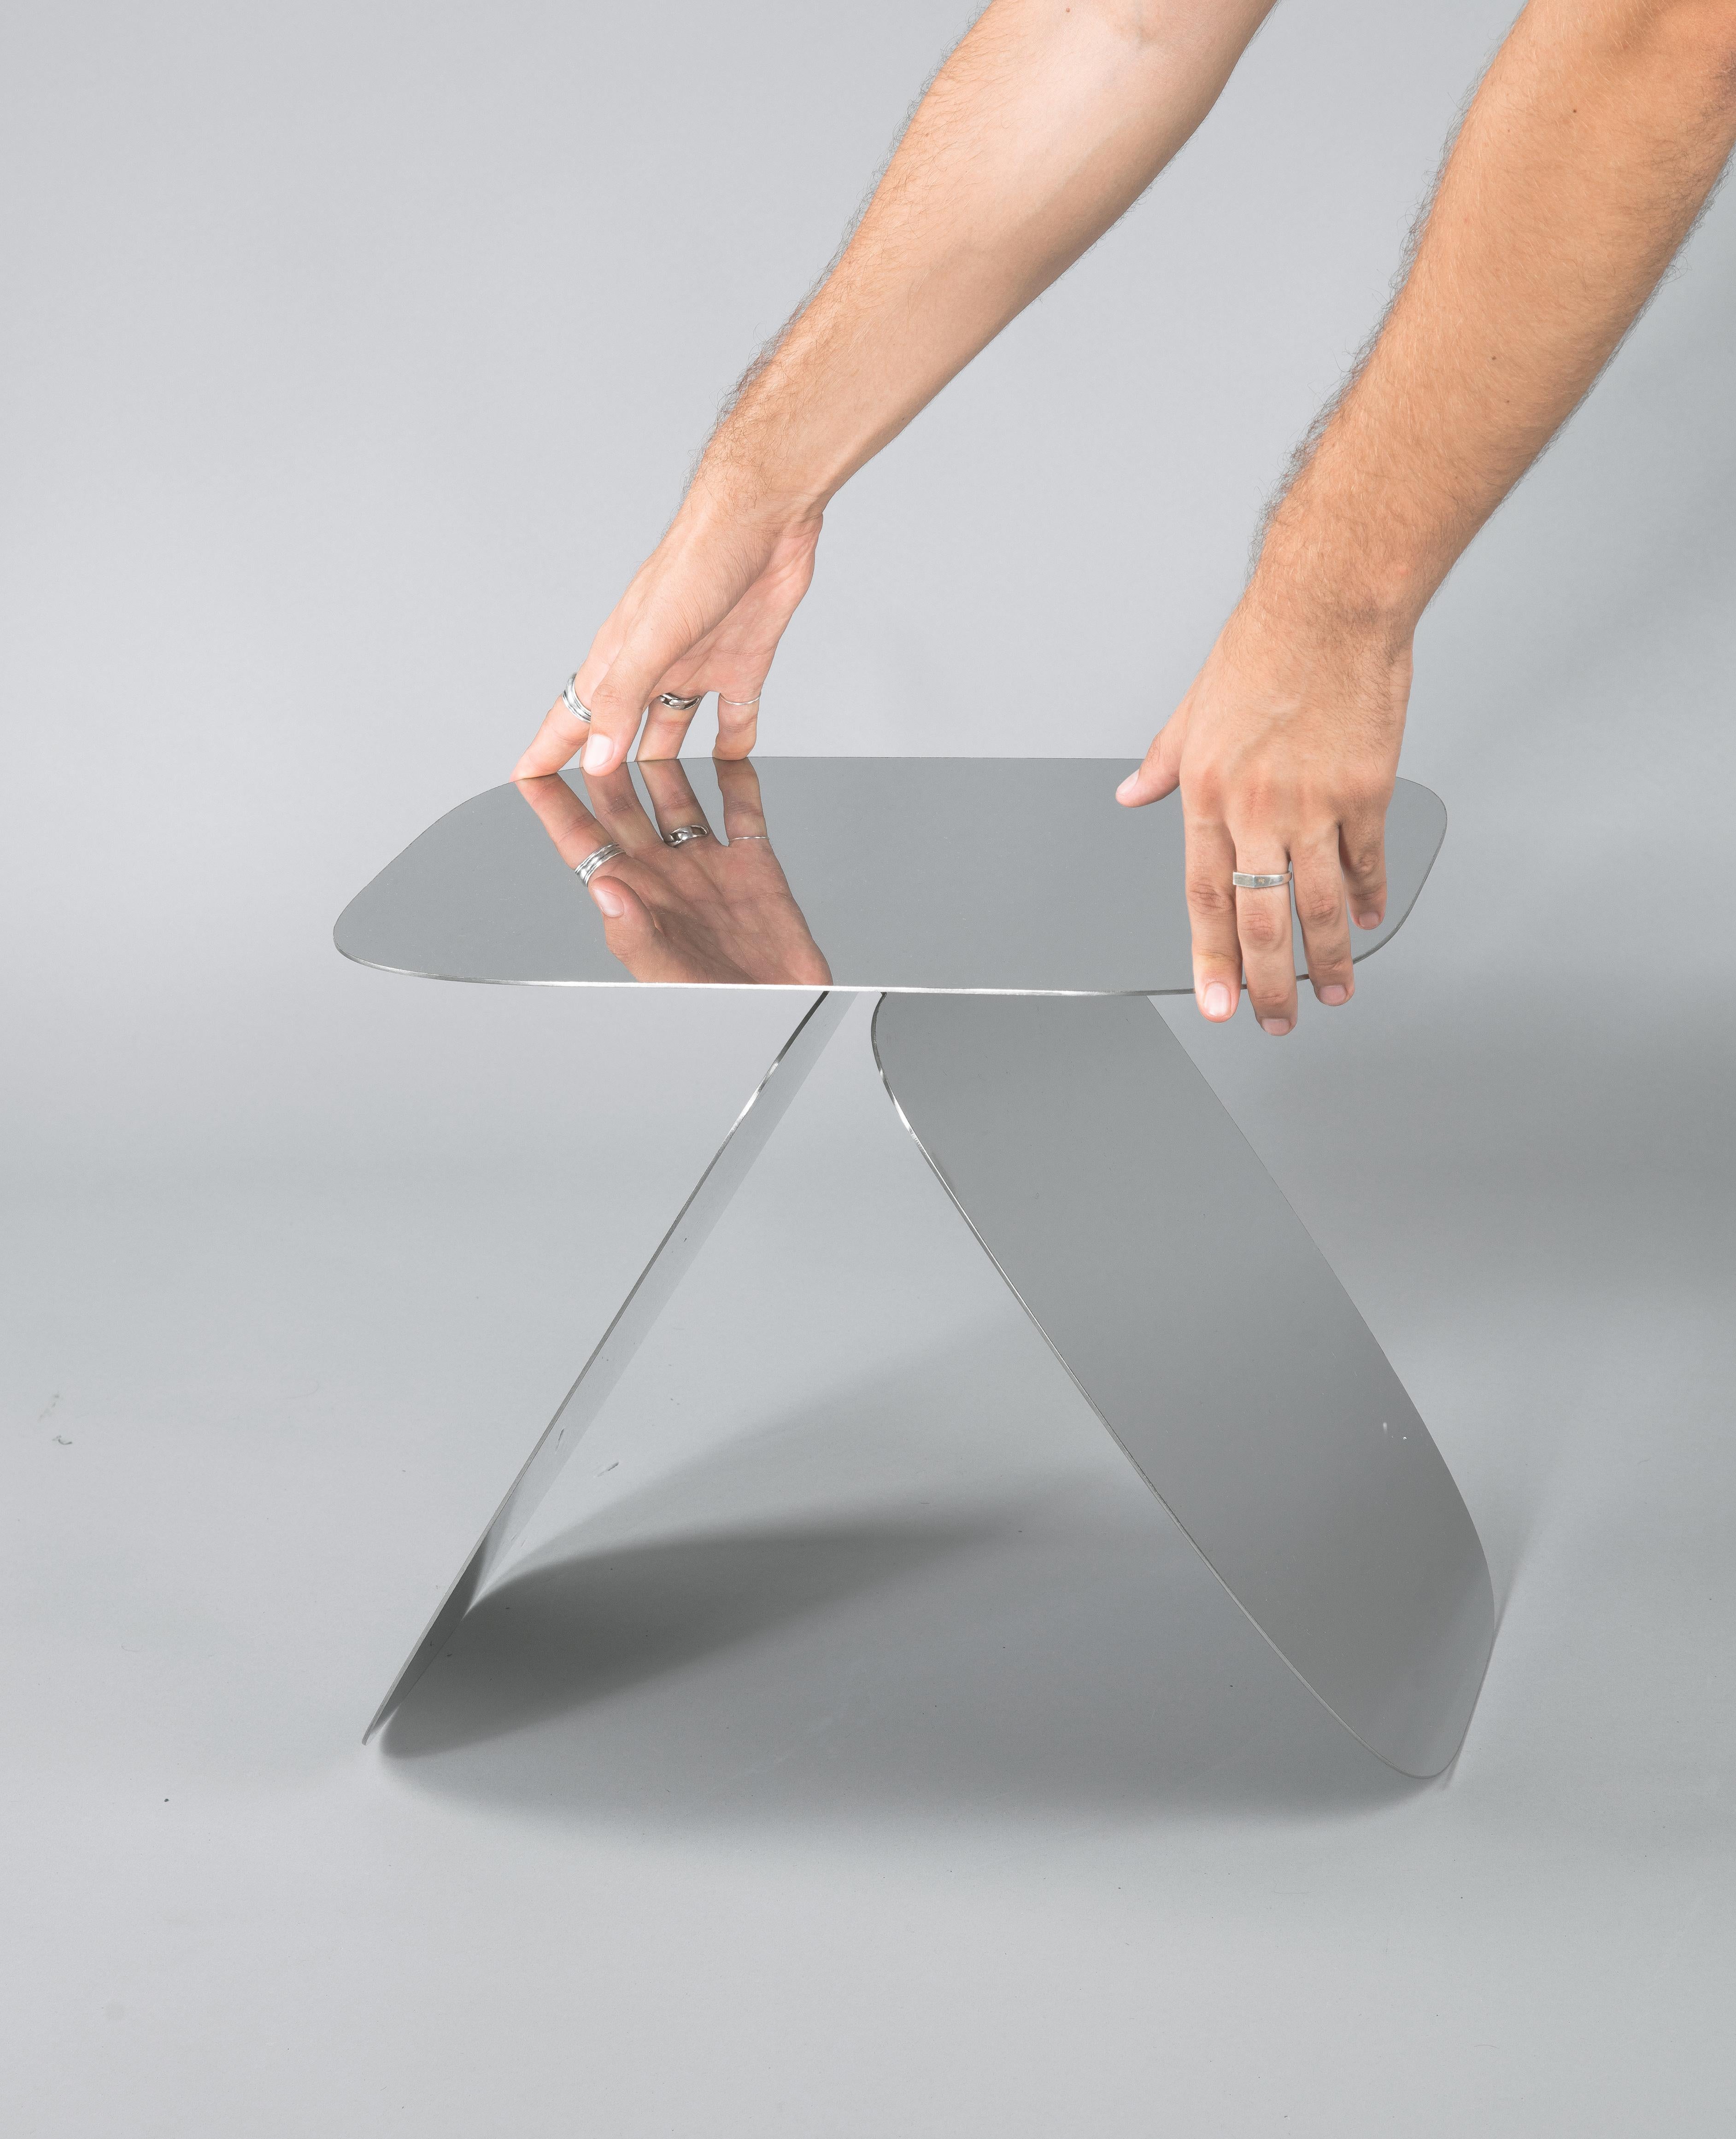 Mirrored Steel Bunny table by Daniel Nikolovski
Dimensions: H 37 x W 43,2 x D 36,3 cm
Materials: Mirrored steel
Also available in powder-coated metal.

‘Bunny Tables’ are side tables made from a cut-out steel sheets resembling bunny ears. The